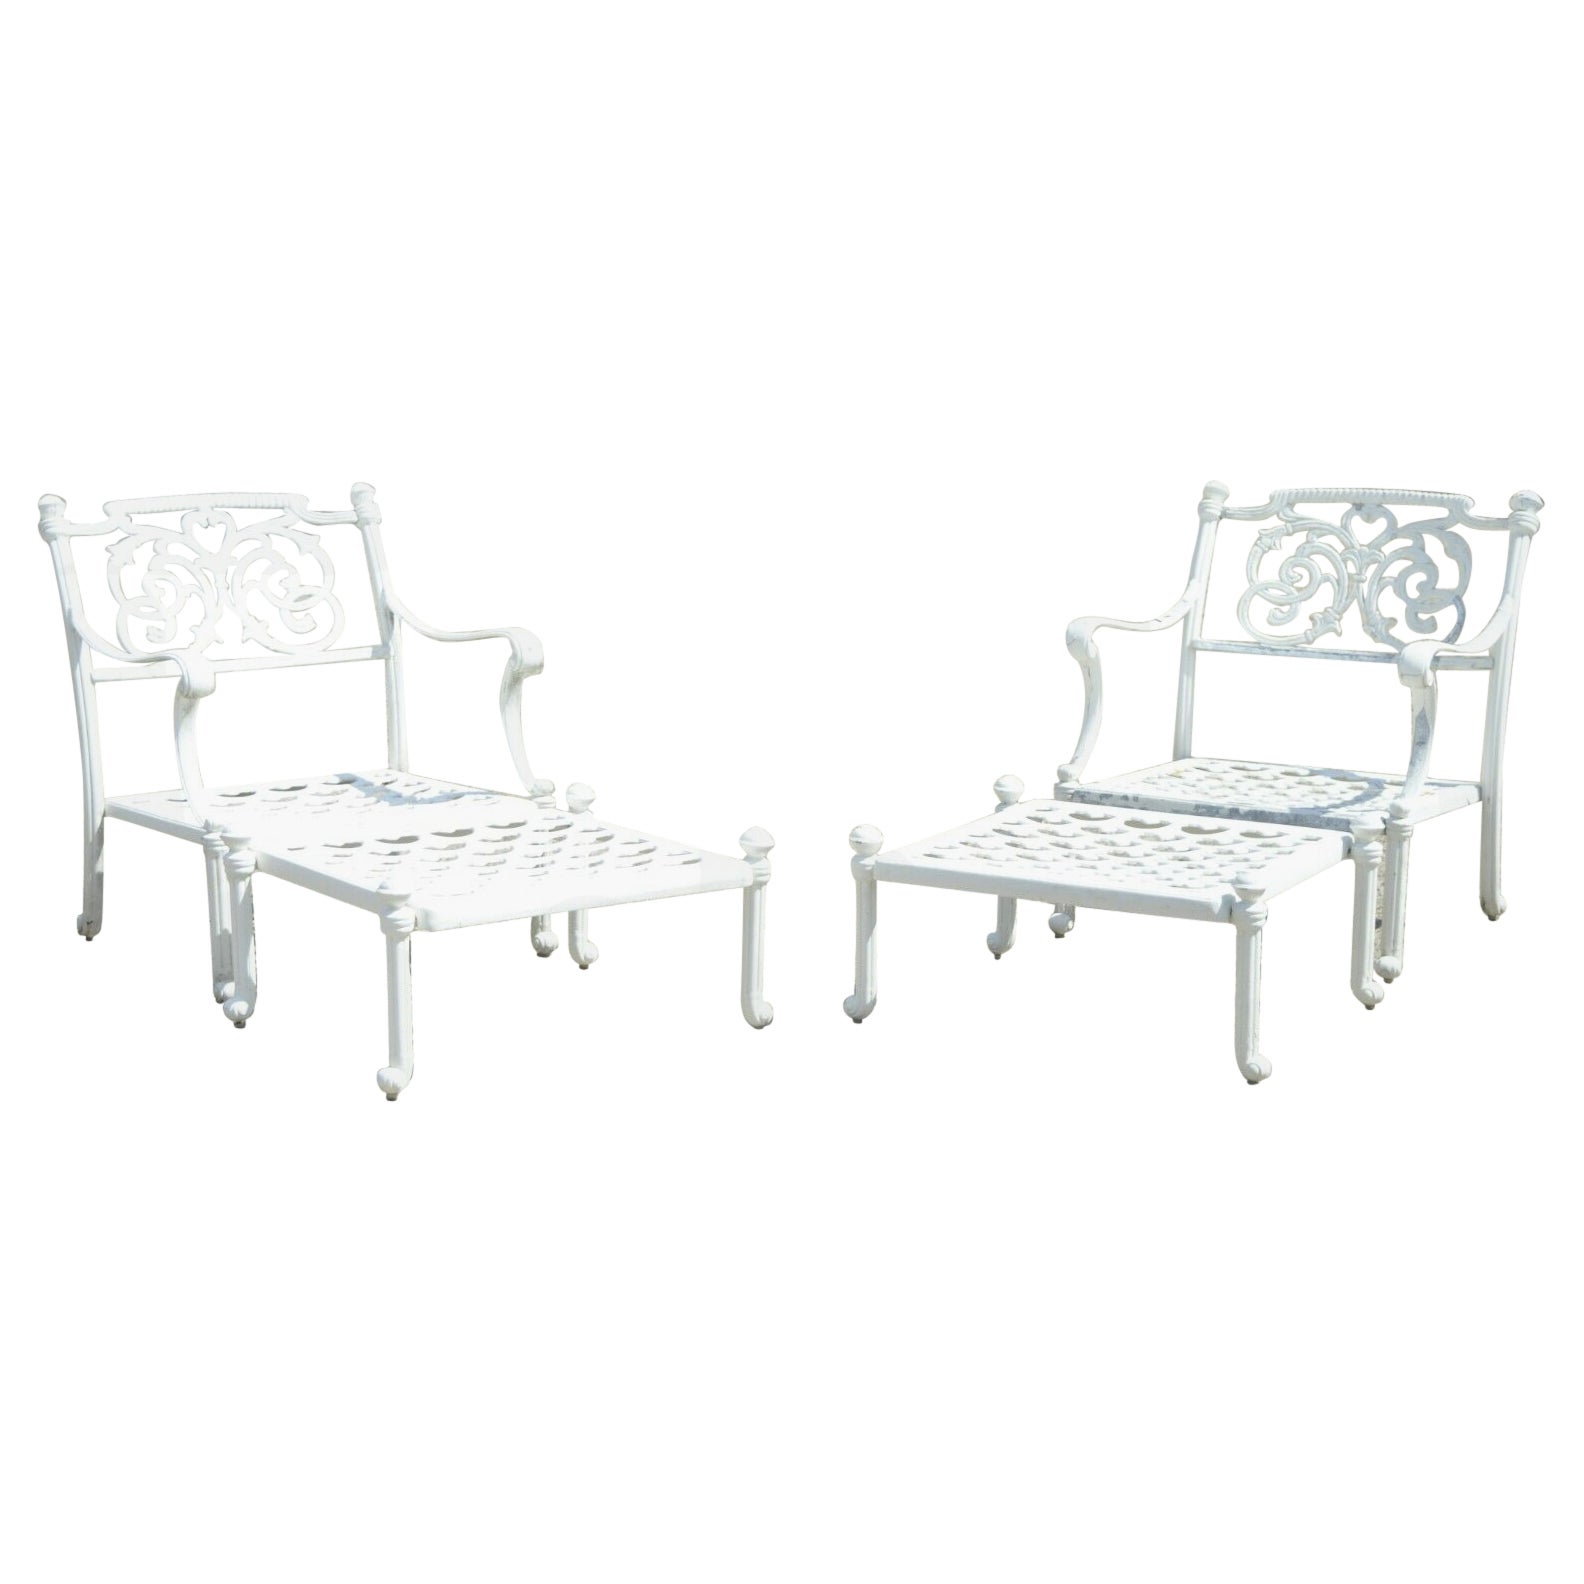 Regency Scrollwork Aluminum Garden Patio Lounge Arm Chairs with Ottoman, a Pair For Sale